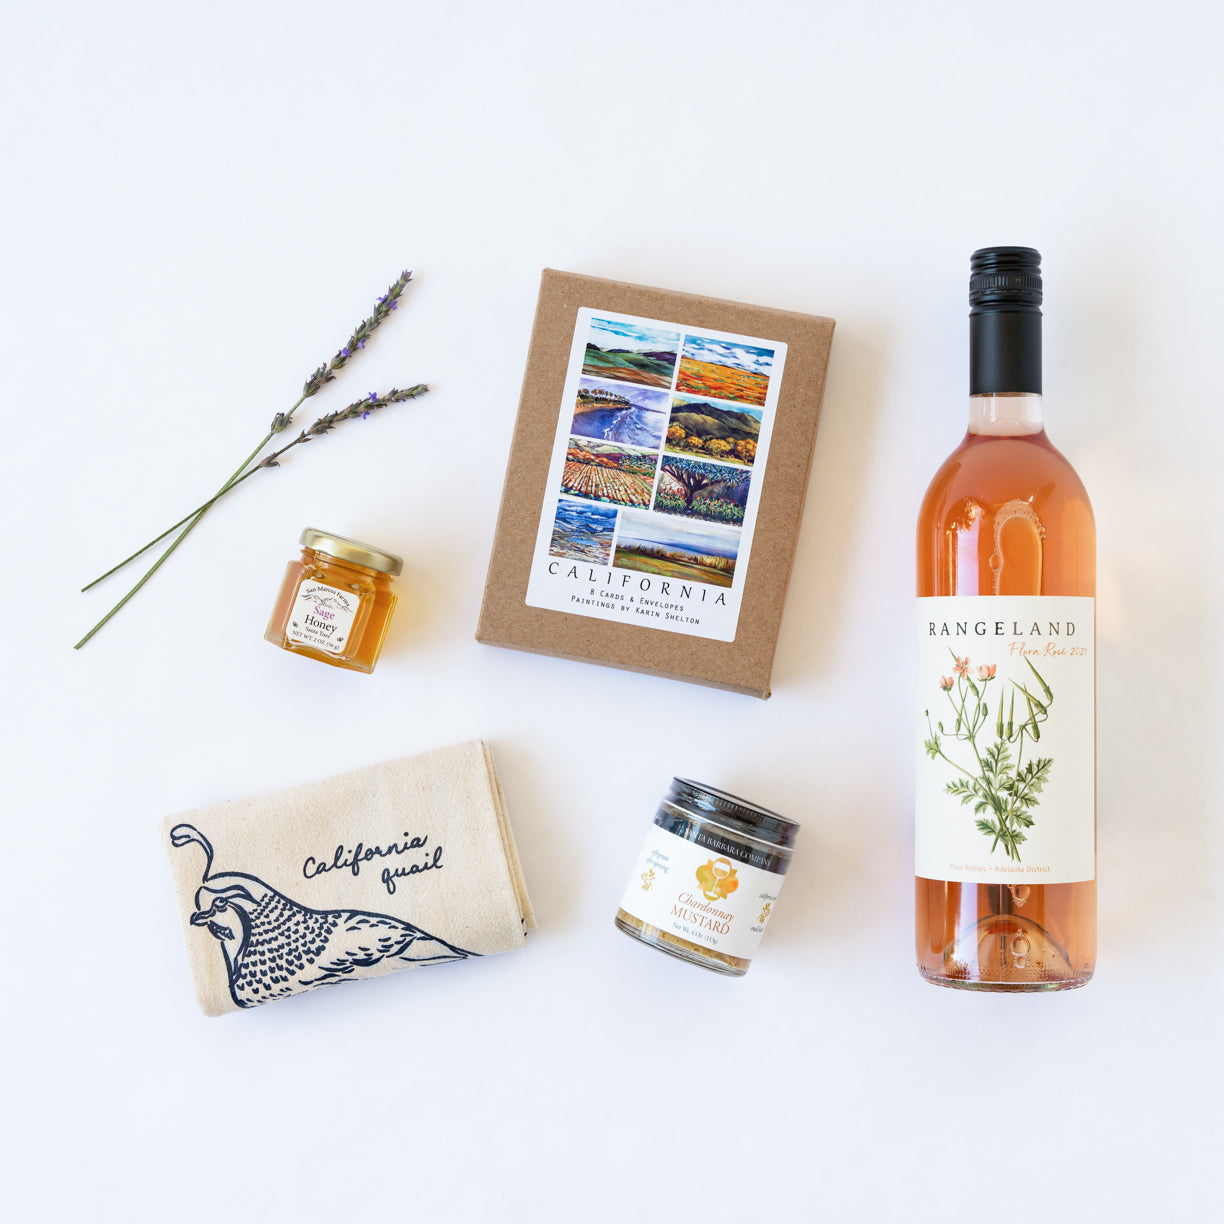 Wine, mini honey, mustard, box of cards, and birds towel on white background